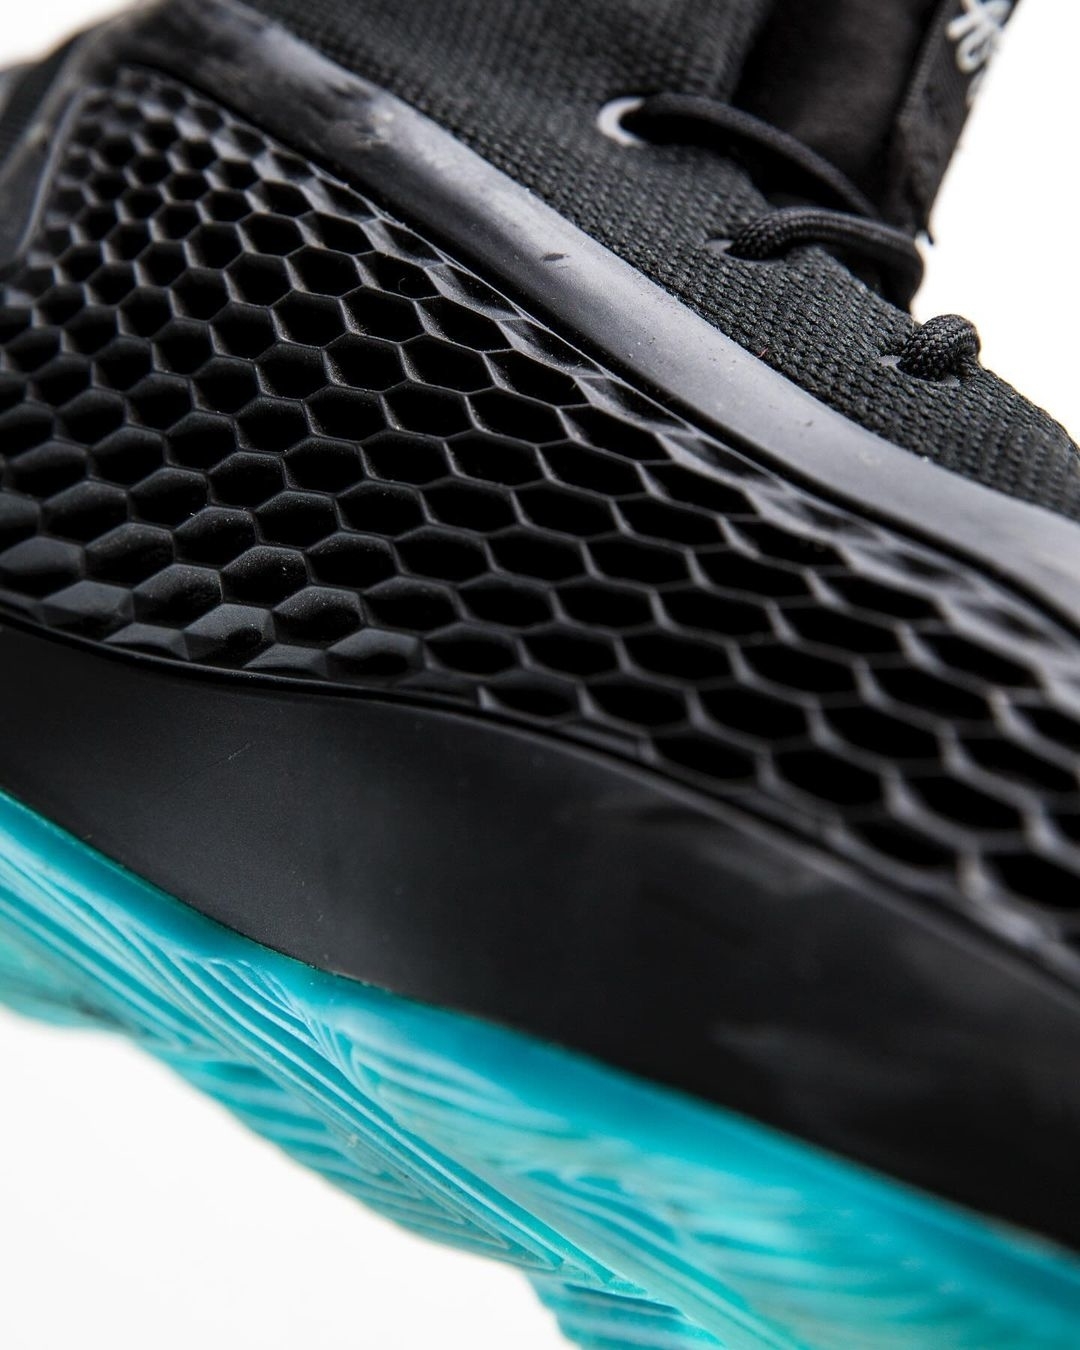 Close-up image of a modern sneaker showcasing a textured honeycomb design on the side and a patterned sole